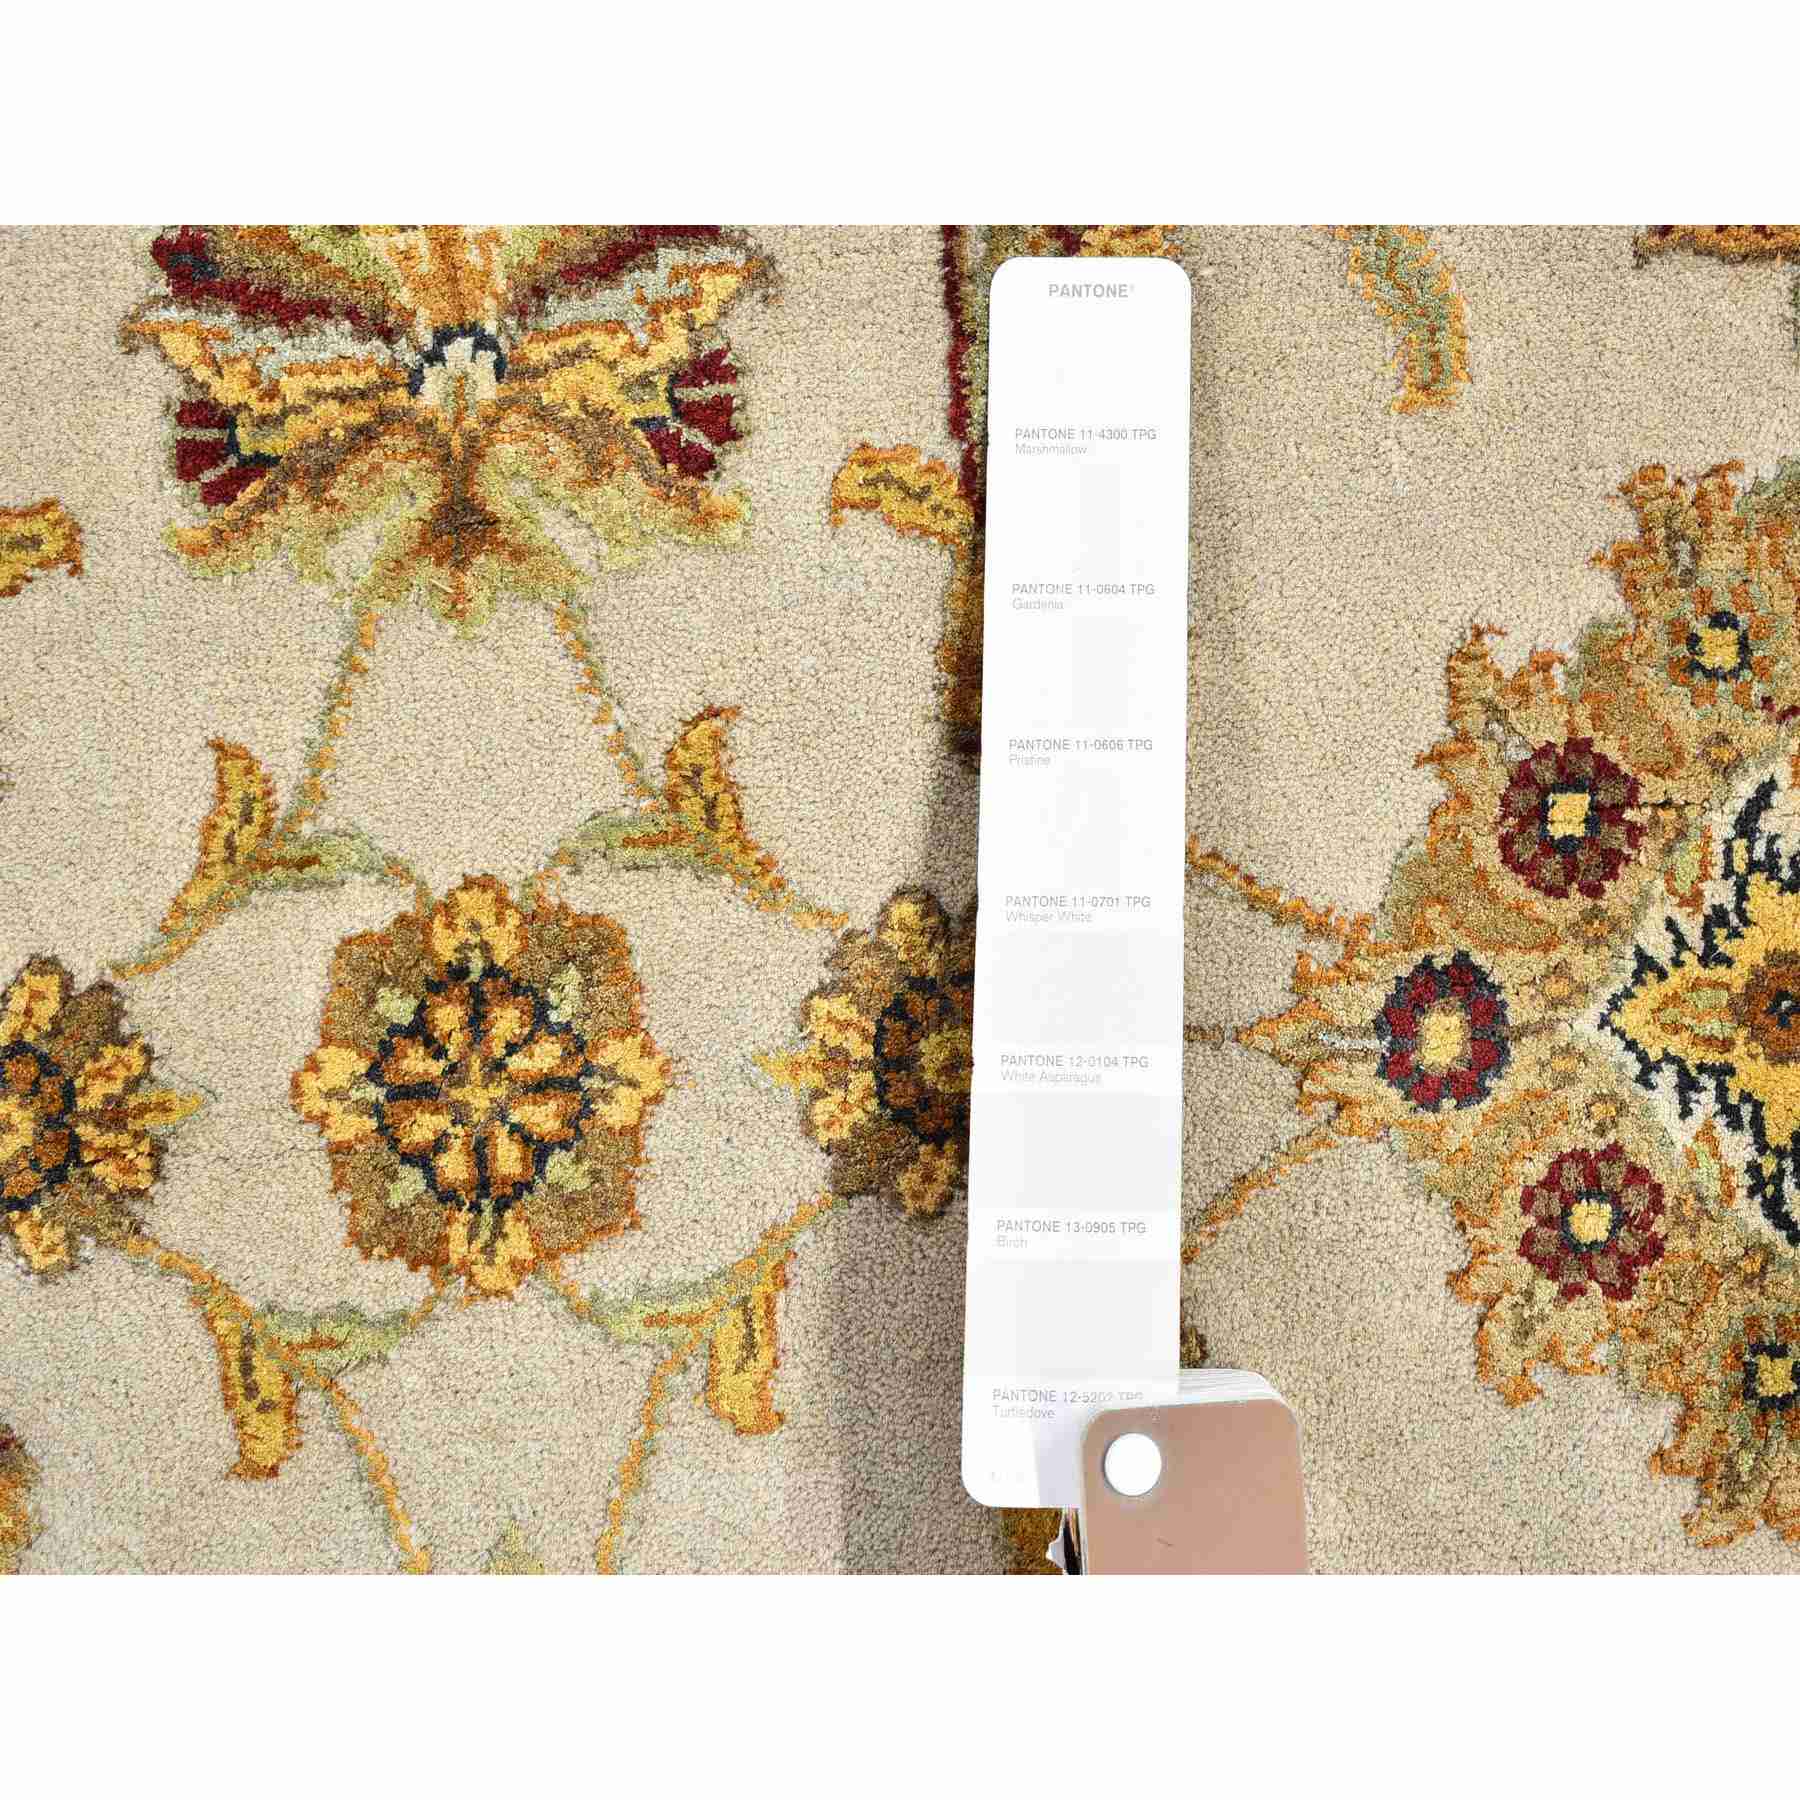 Rajasthan-Hand-Knotted-Rug-333630